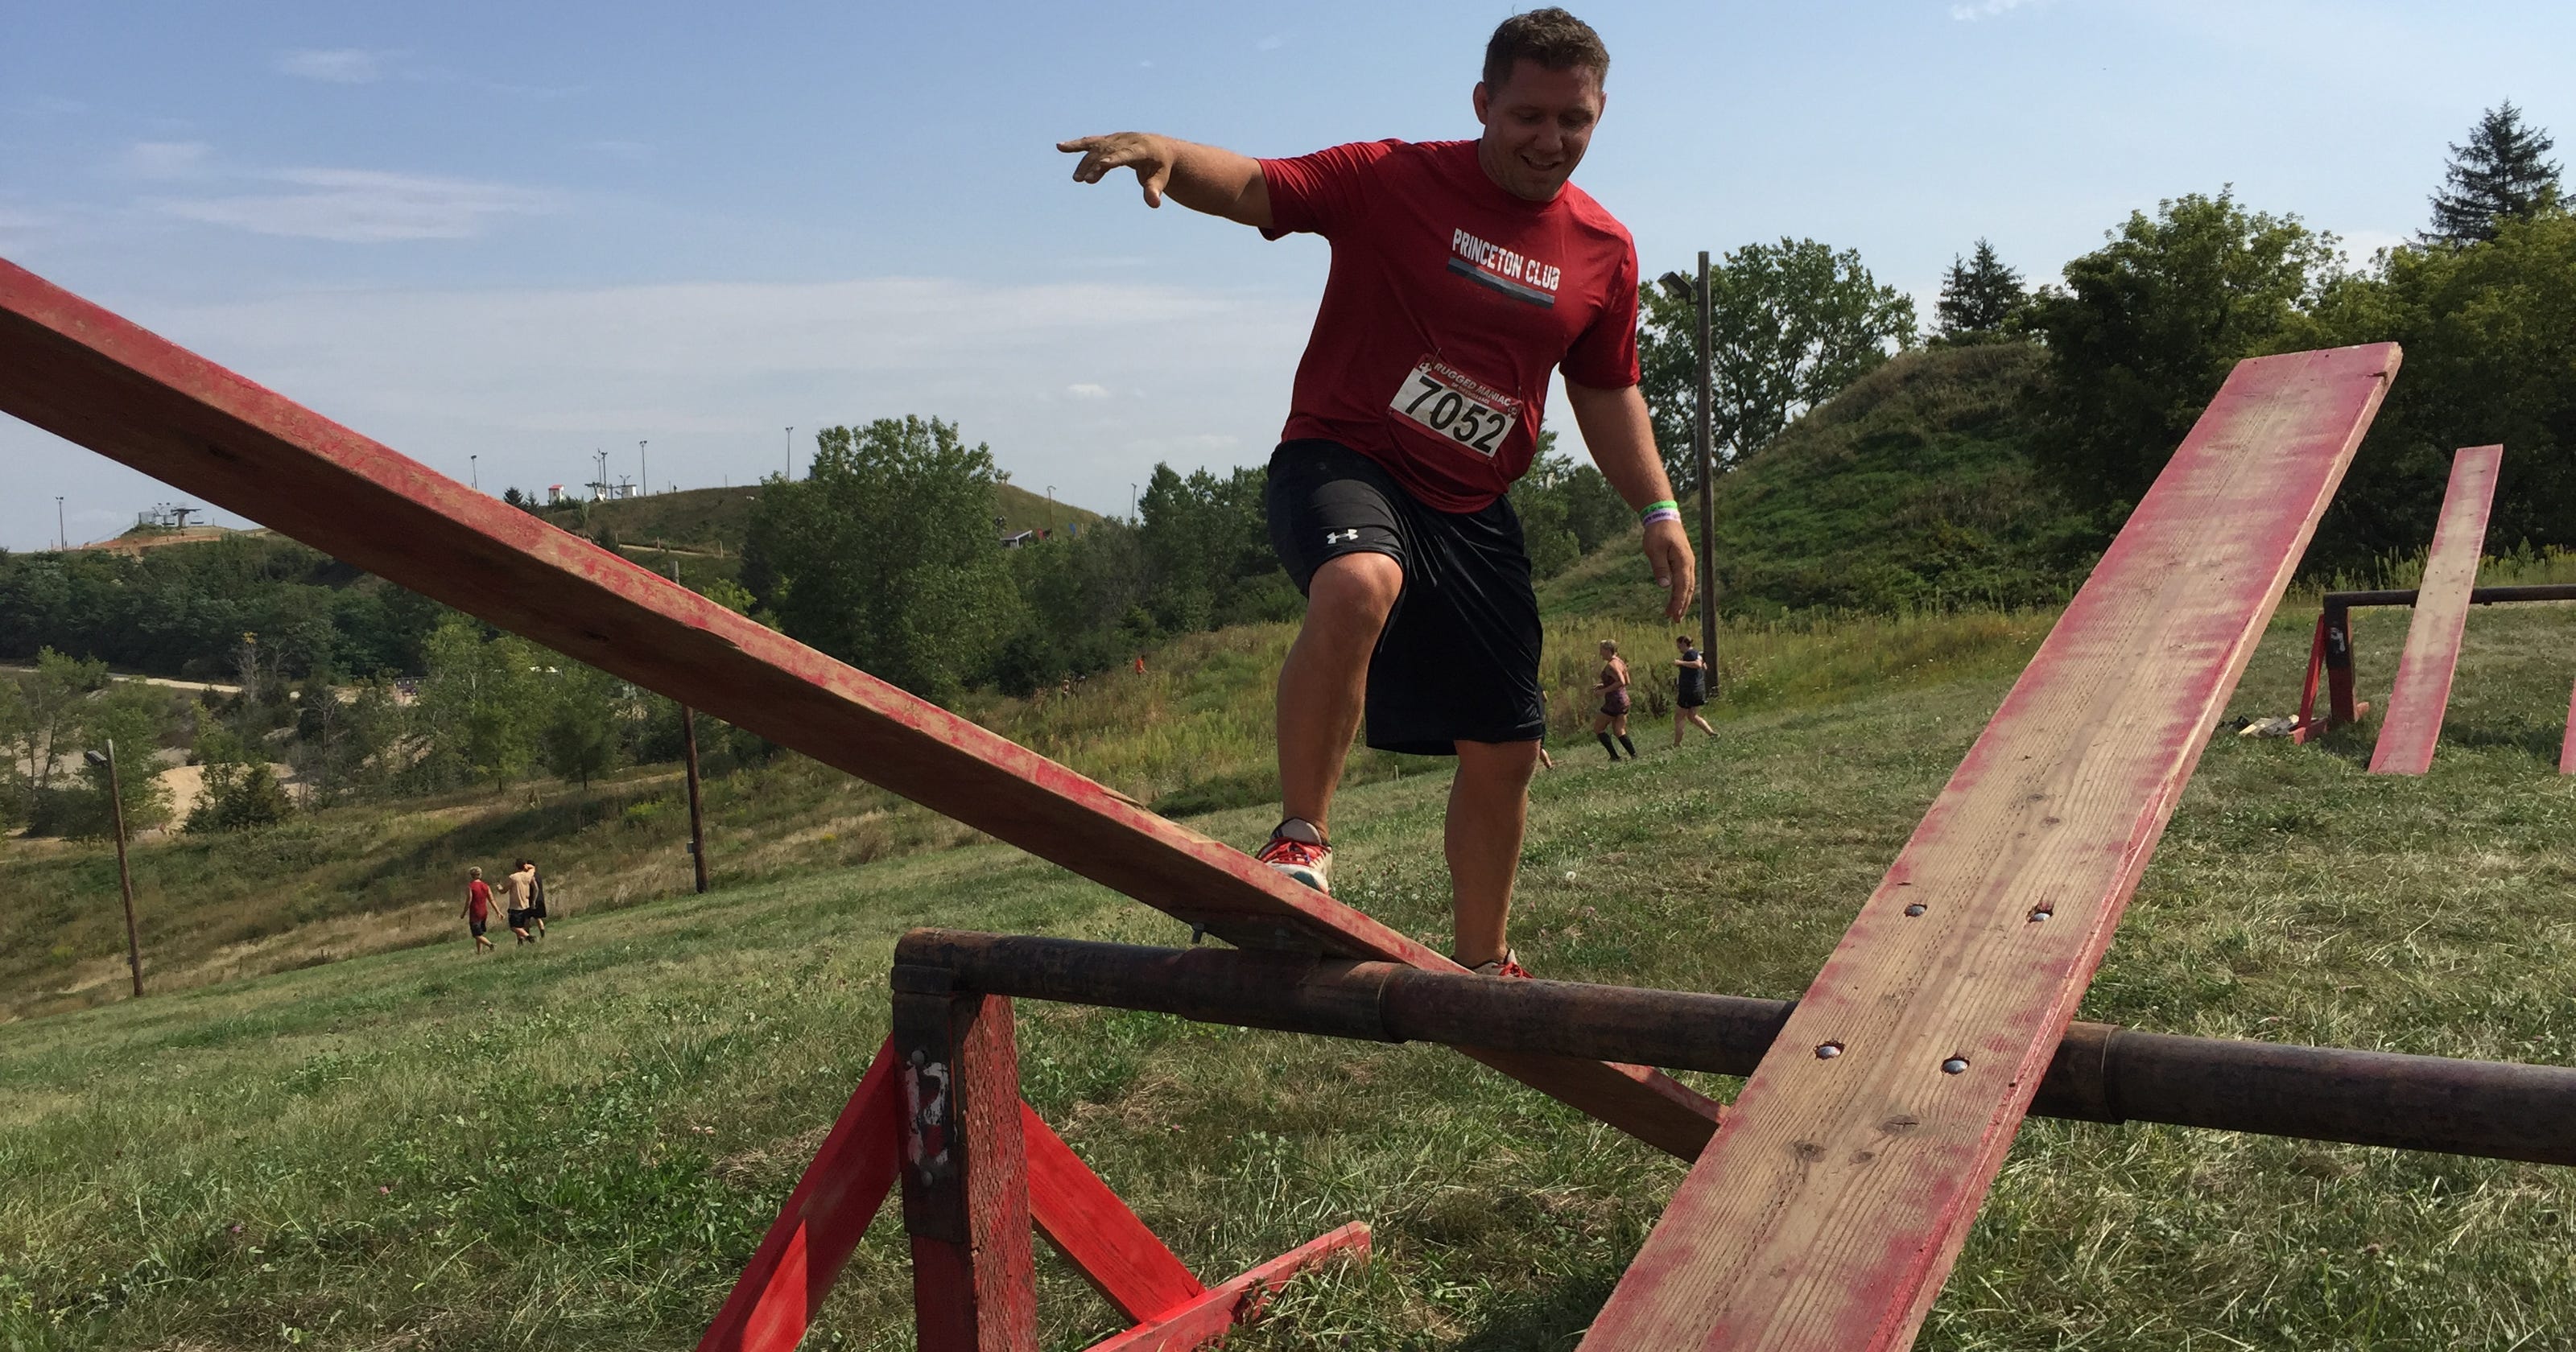 Trainers Share Expertise On Obstacle Course Race